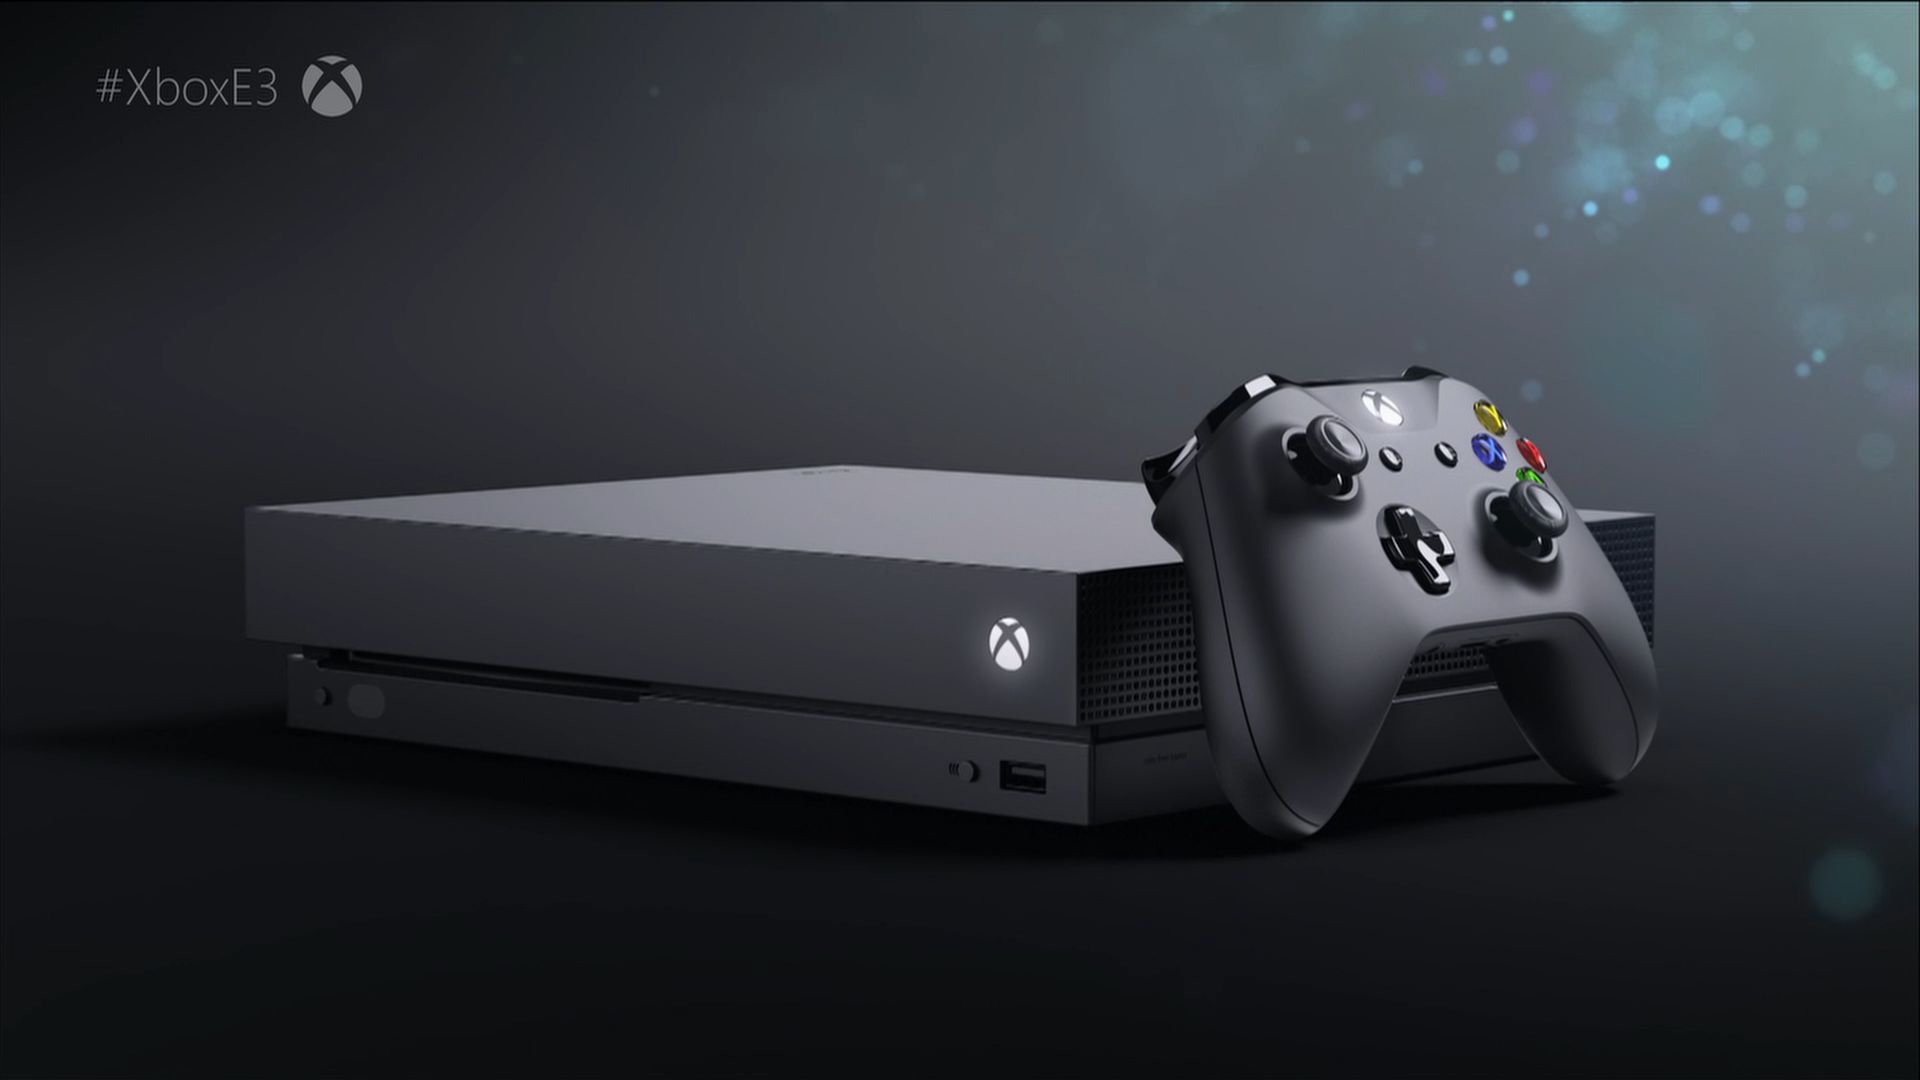 Microsoft Announces Xbox One X, Set to Release This November; First Image of Console Released